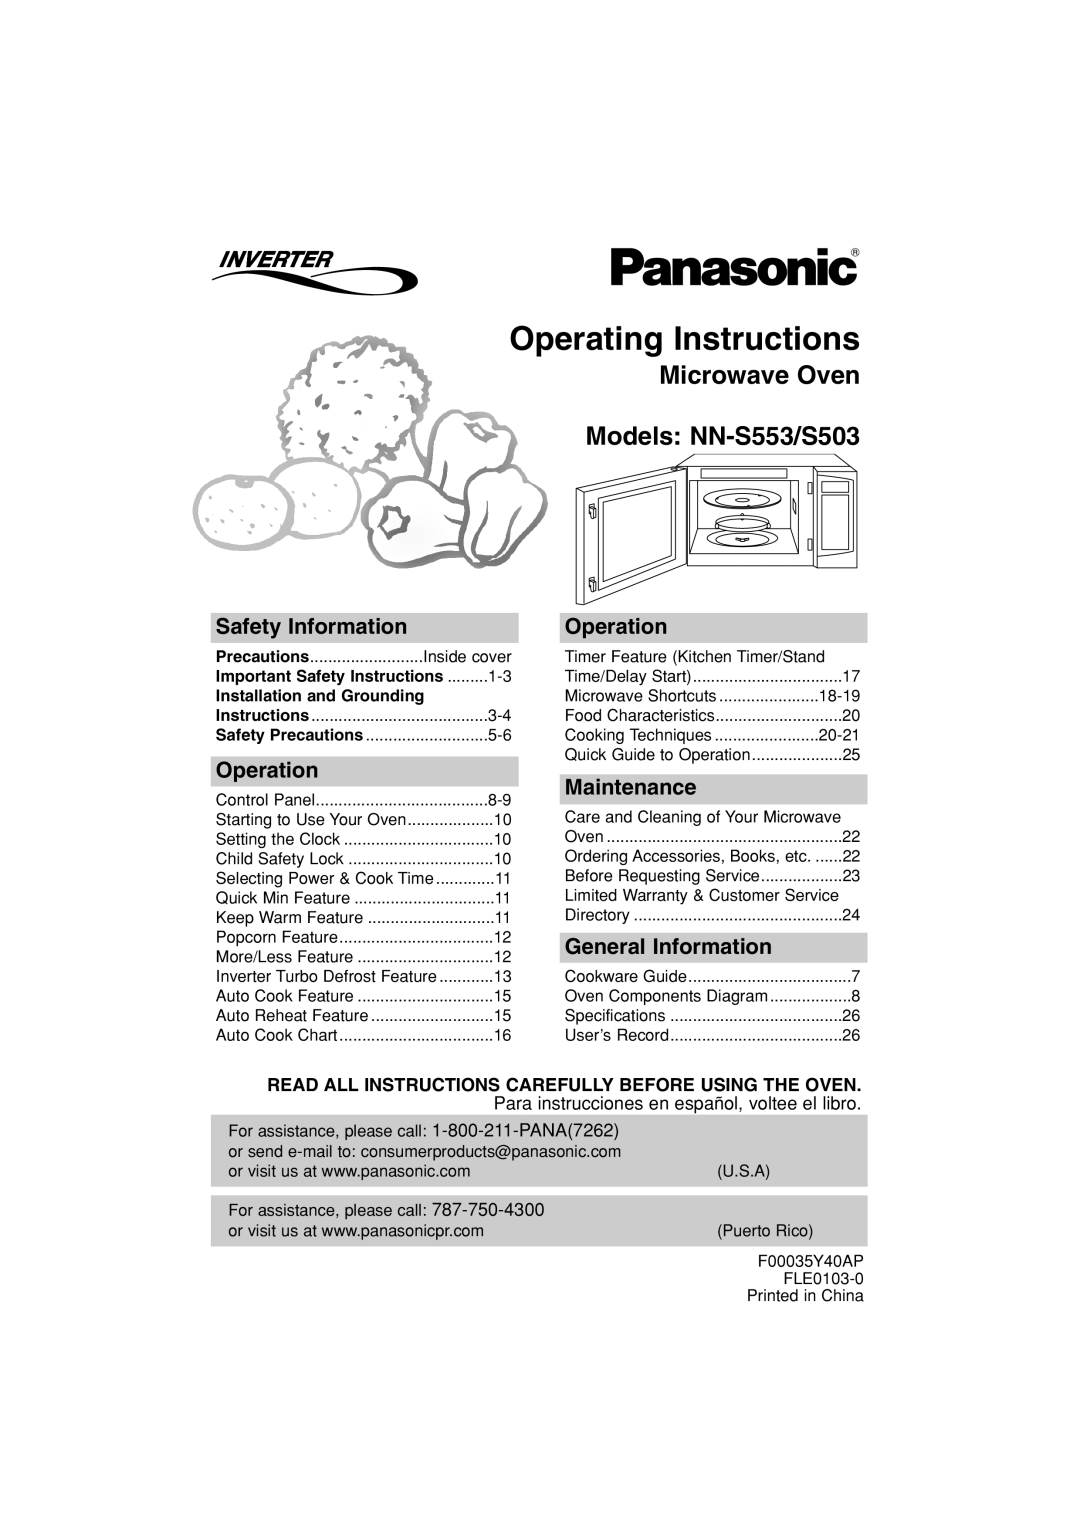 Panasonic NN-S503 important safety instructions Operating Instructions, Microwave Oven Models NN-S553/S503, Operation 